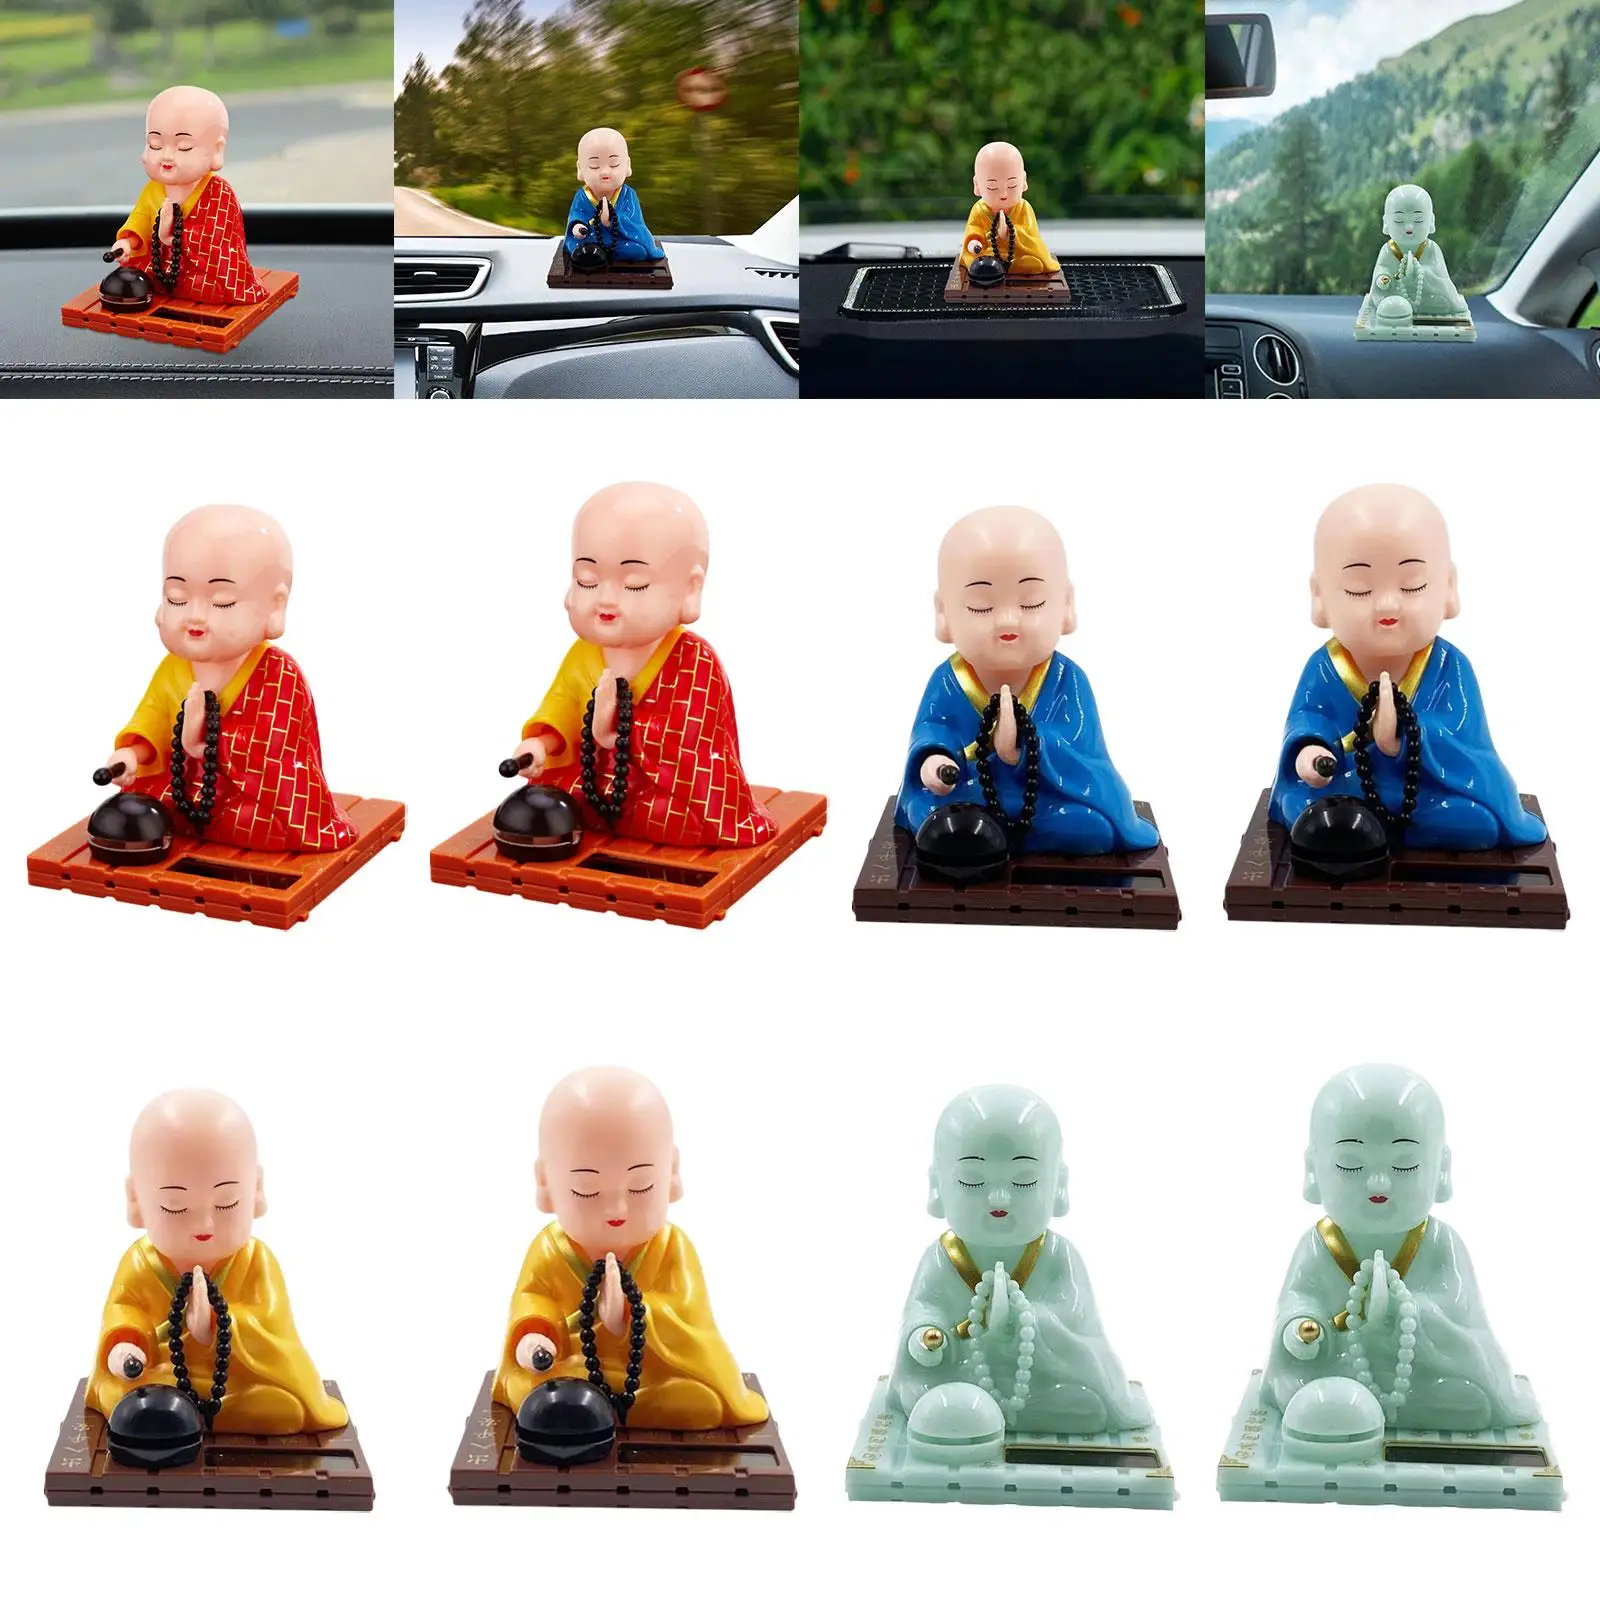 Little Monk Figurine Solar Powered Car Toy Bobble Head Toy Dashboard Decoration Buddha Monks Statue Car Ornament for Home Decor